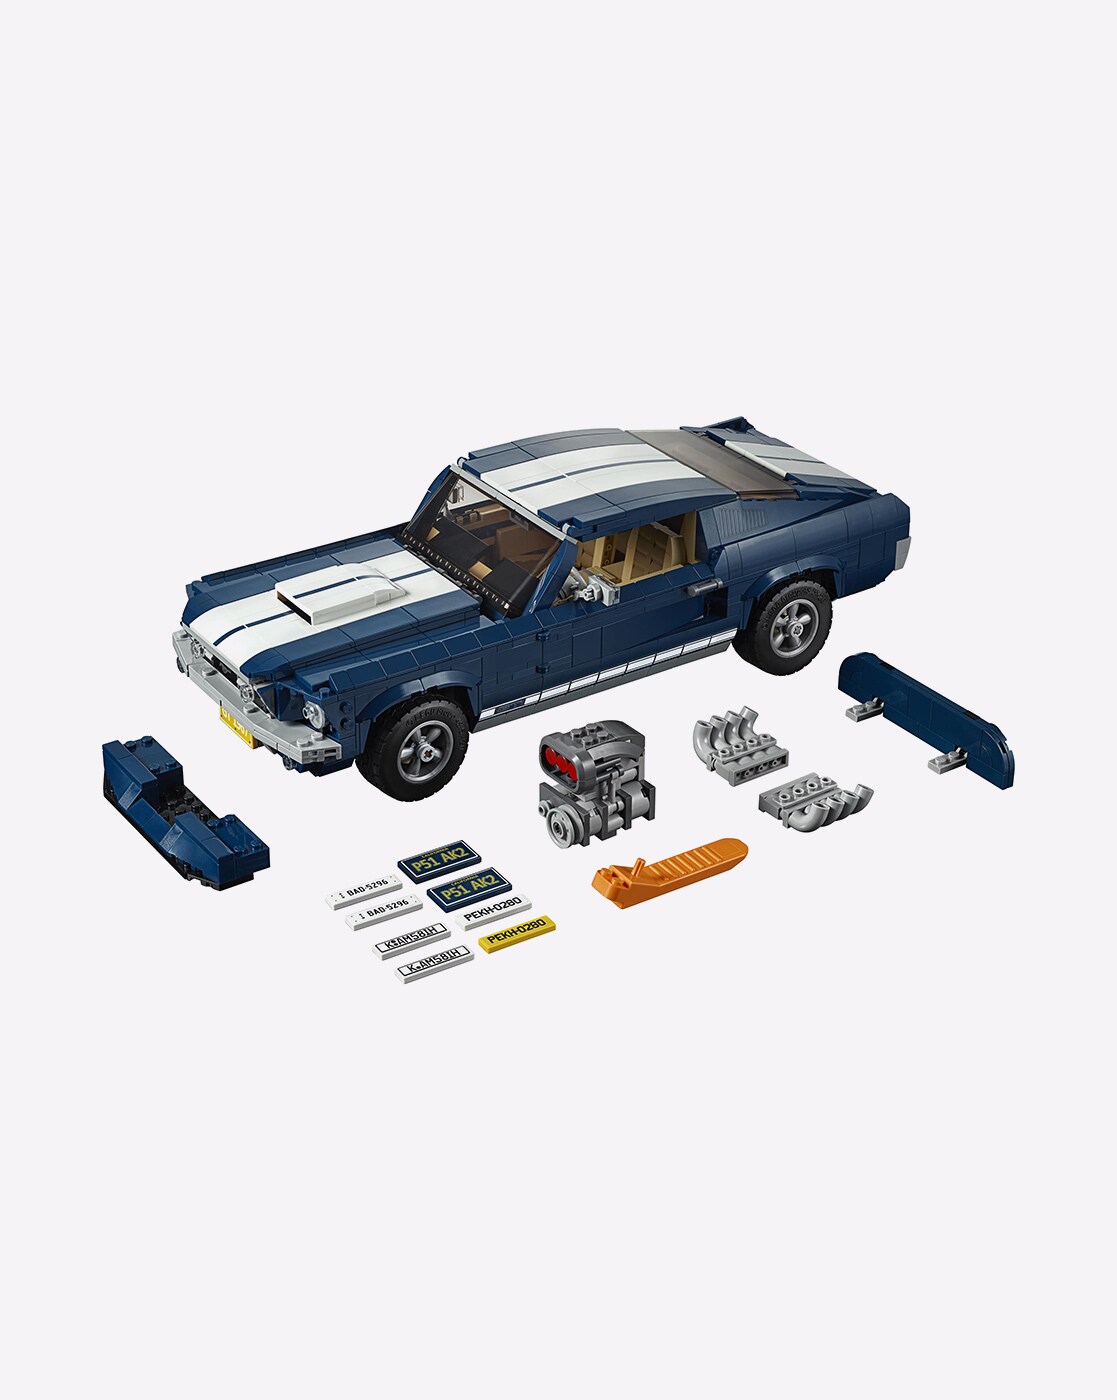 LEGO Creator Expert Ford Mustang 10265 Building Kit - Creator Expert Ford  Mustang 10265 Building Kit . Buy Ford Mustang toys in India. shop for LEGO  products in India.